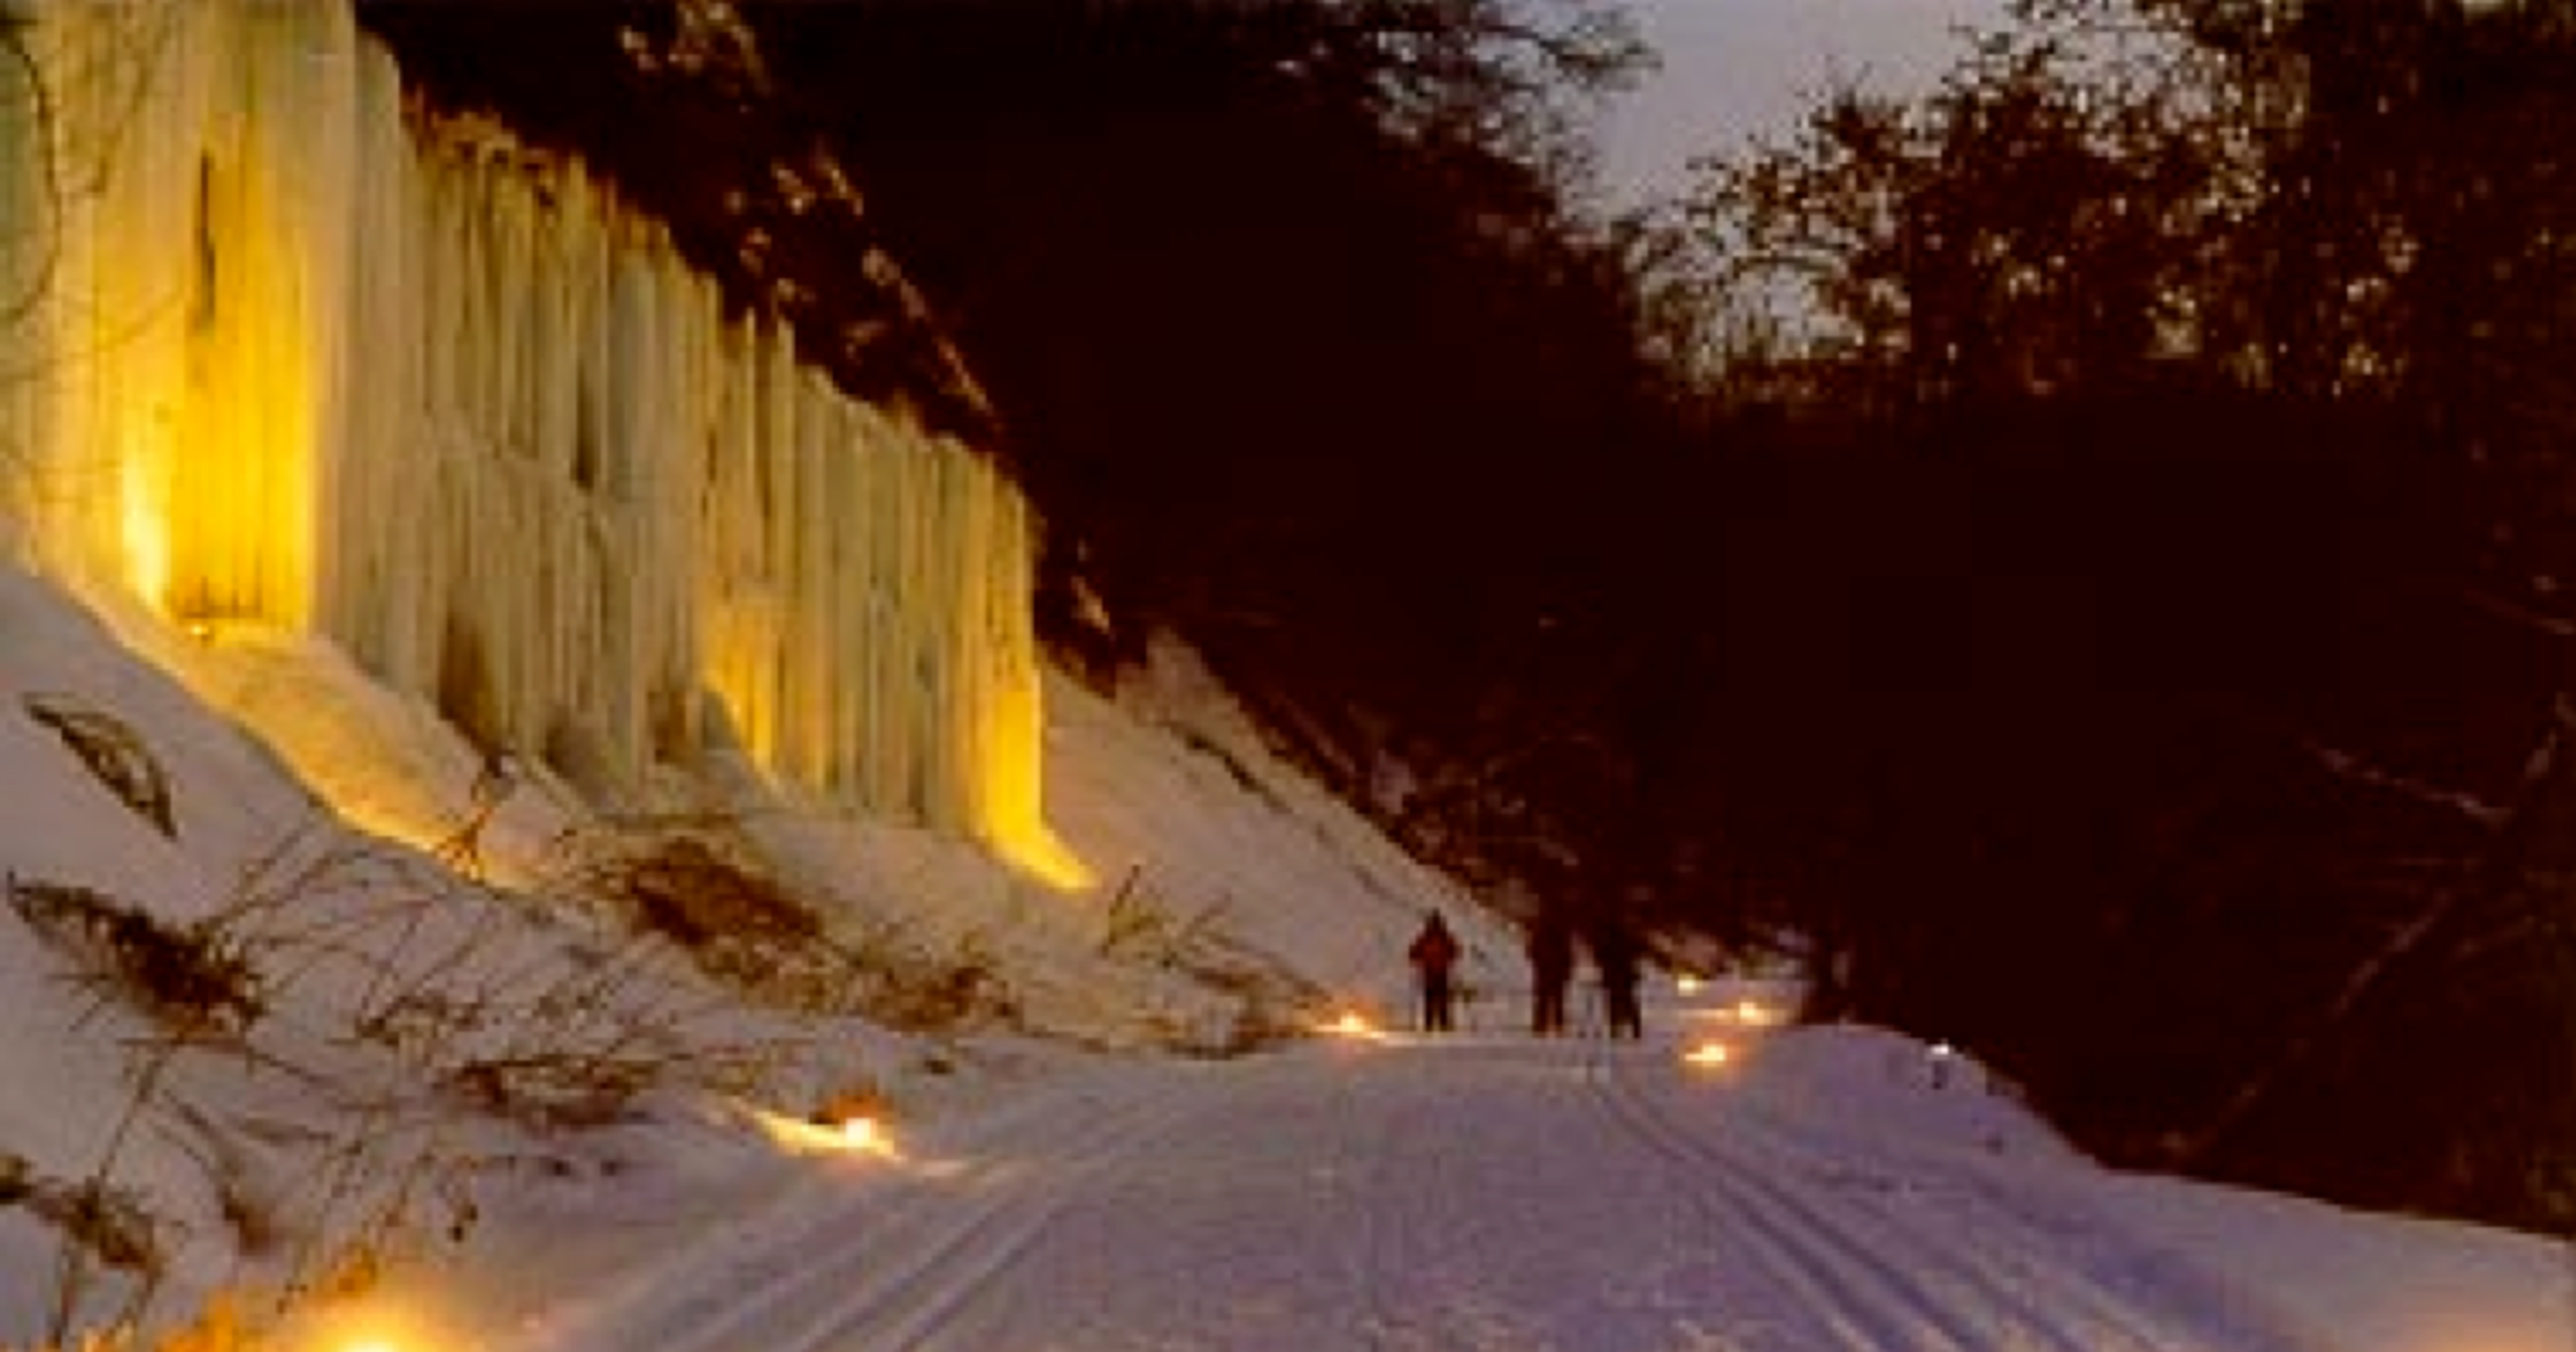 2019 candlelight hike, snowshoe and ski events around Wisconsin